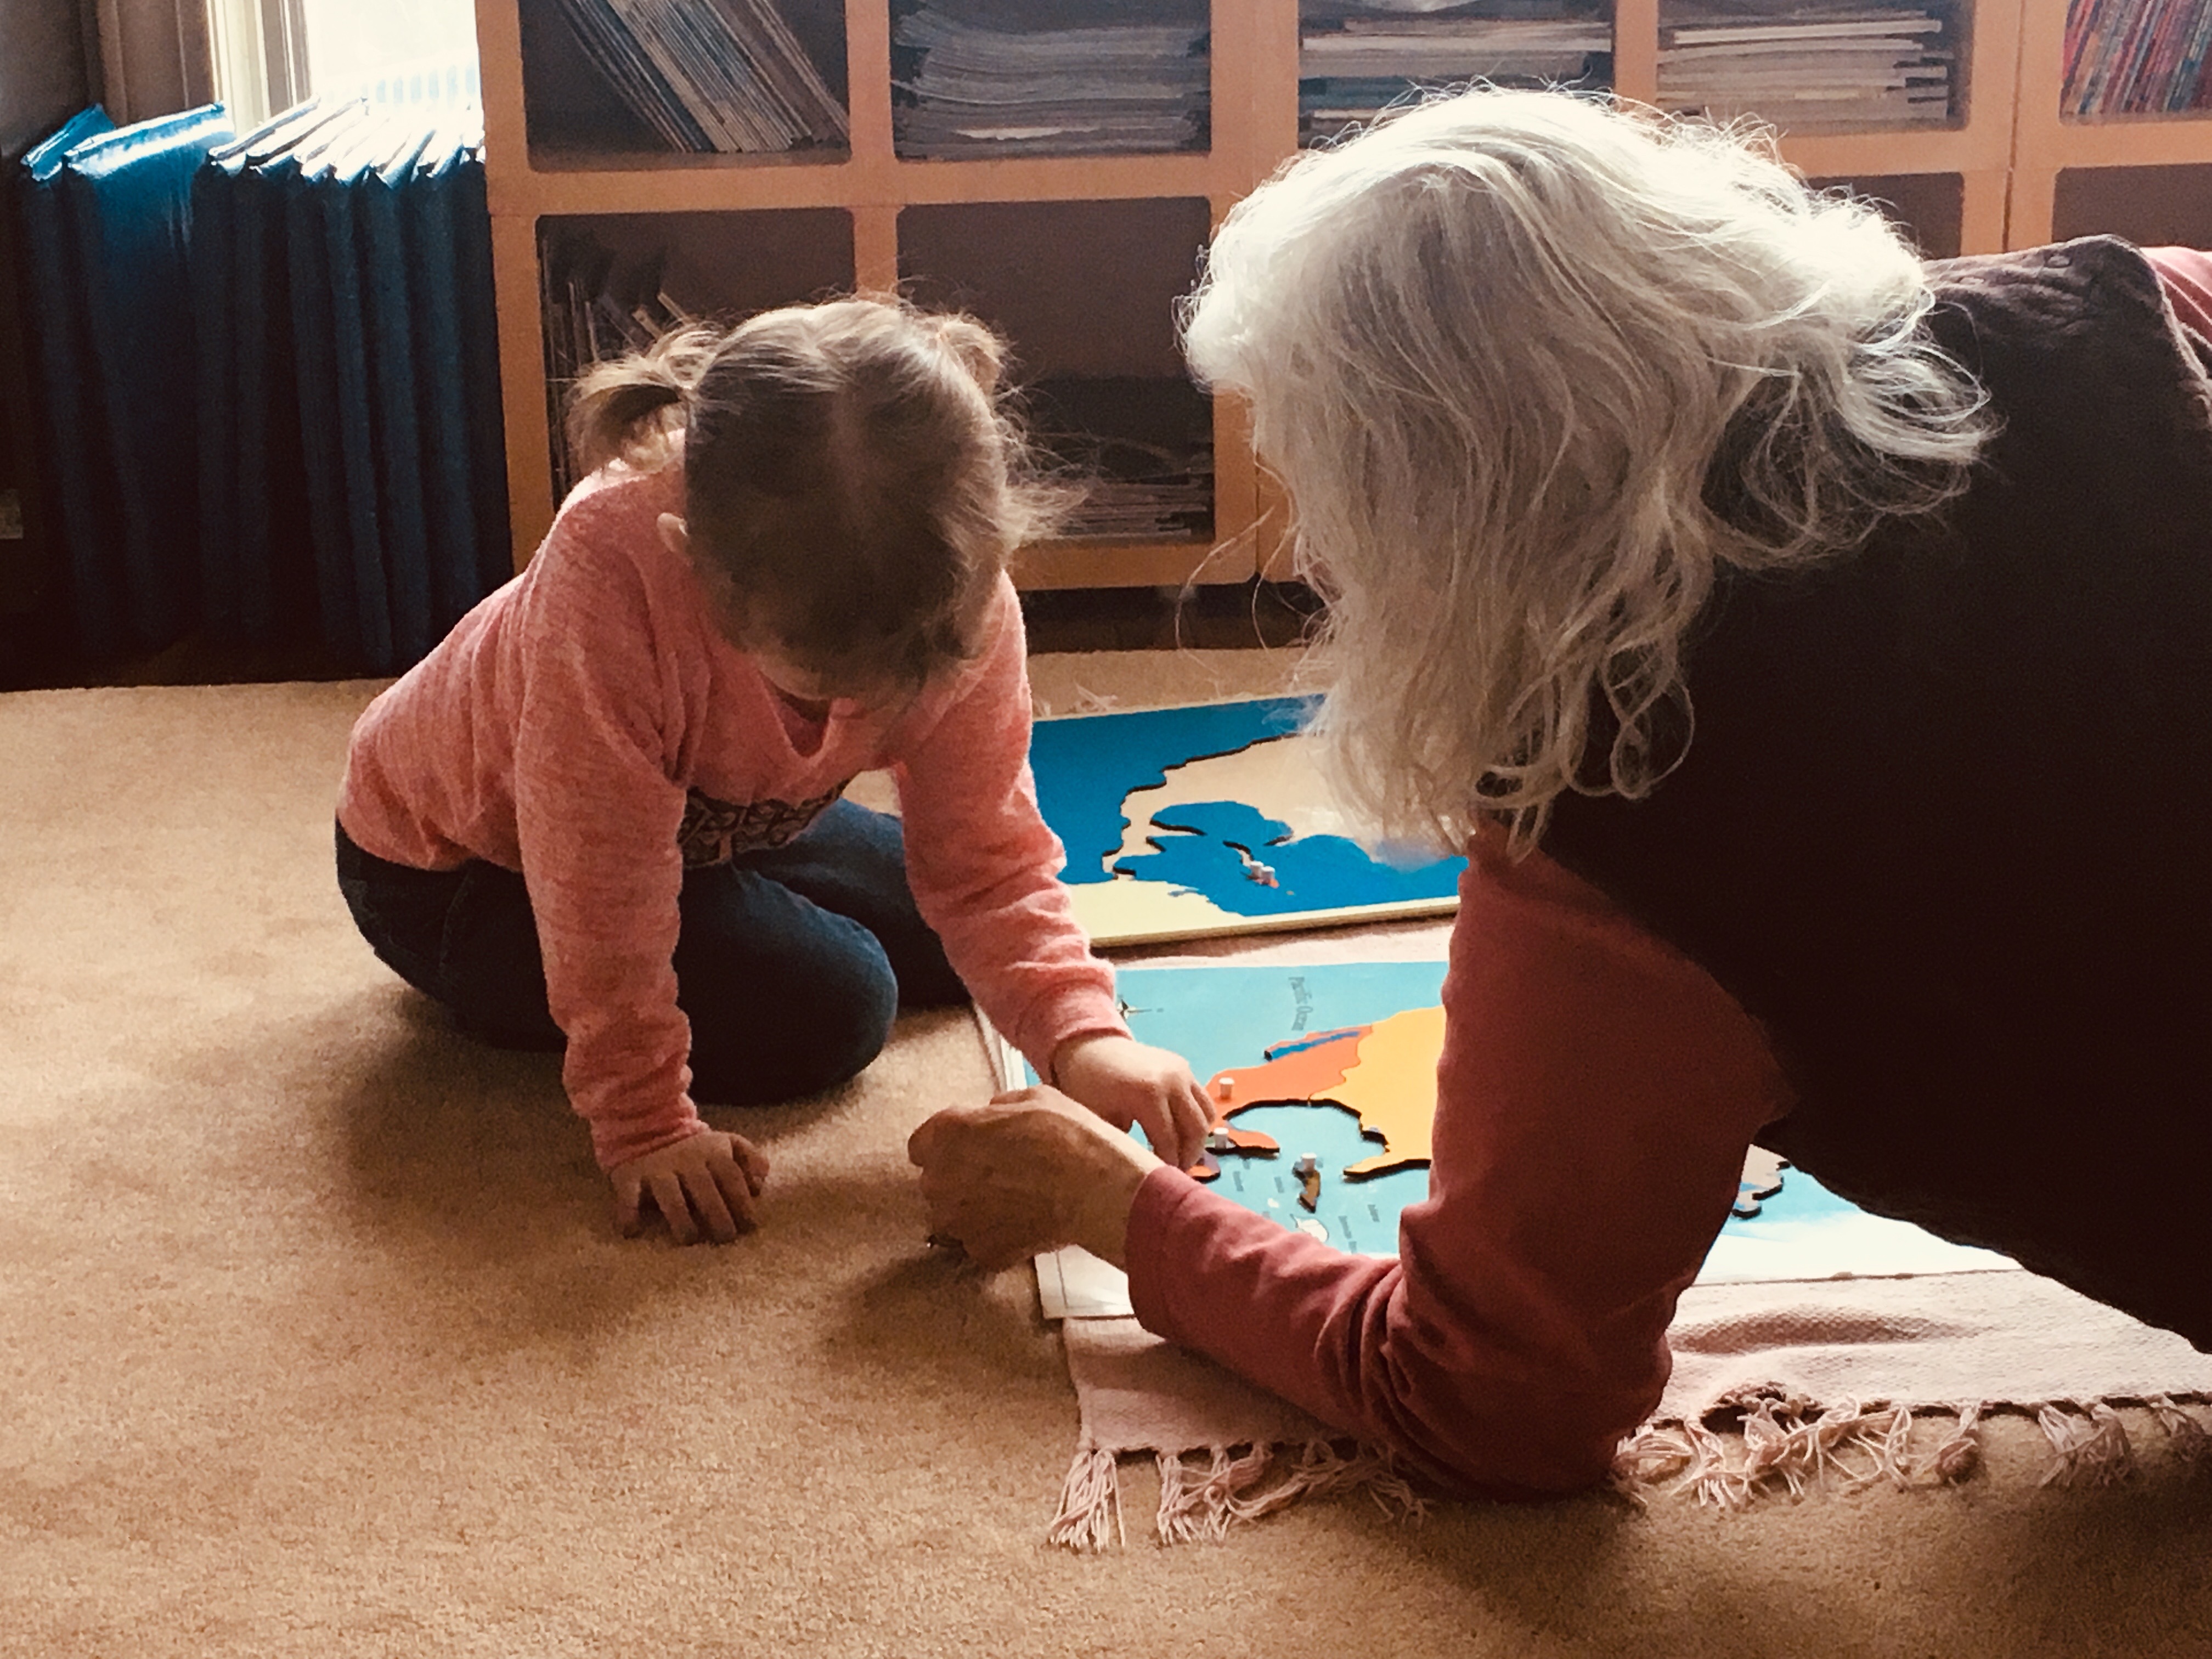 Ellie, age 5, working the North American puzzle map with Mrs. Dyer.